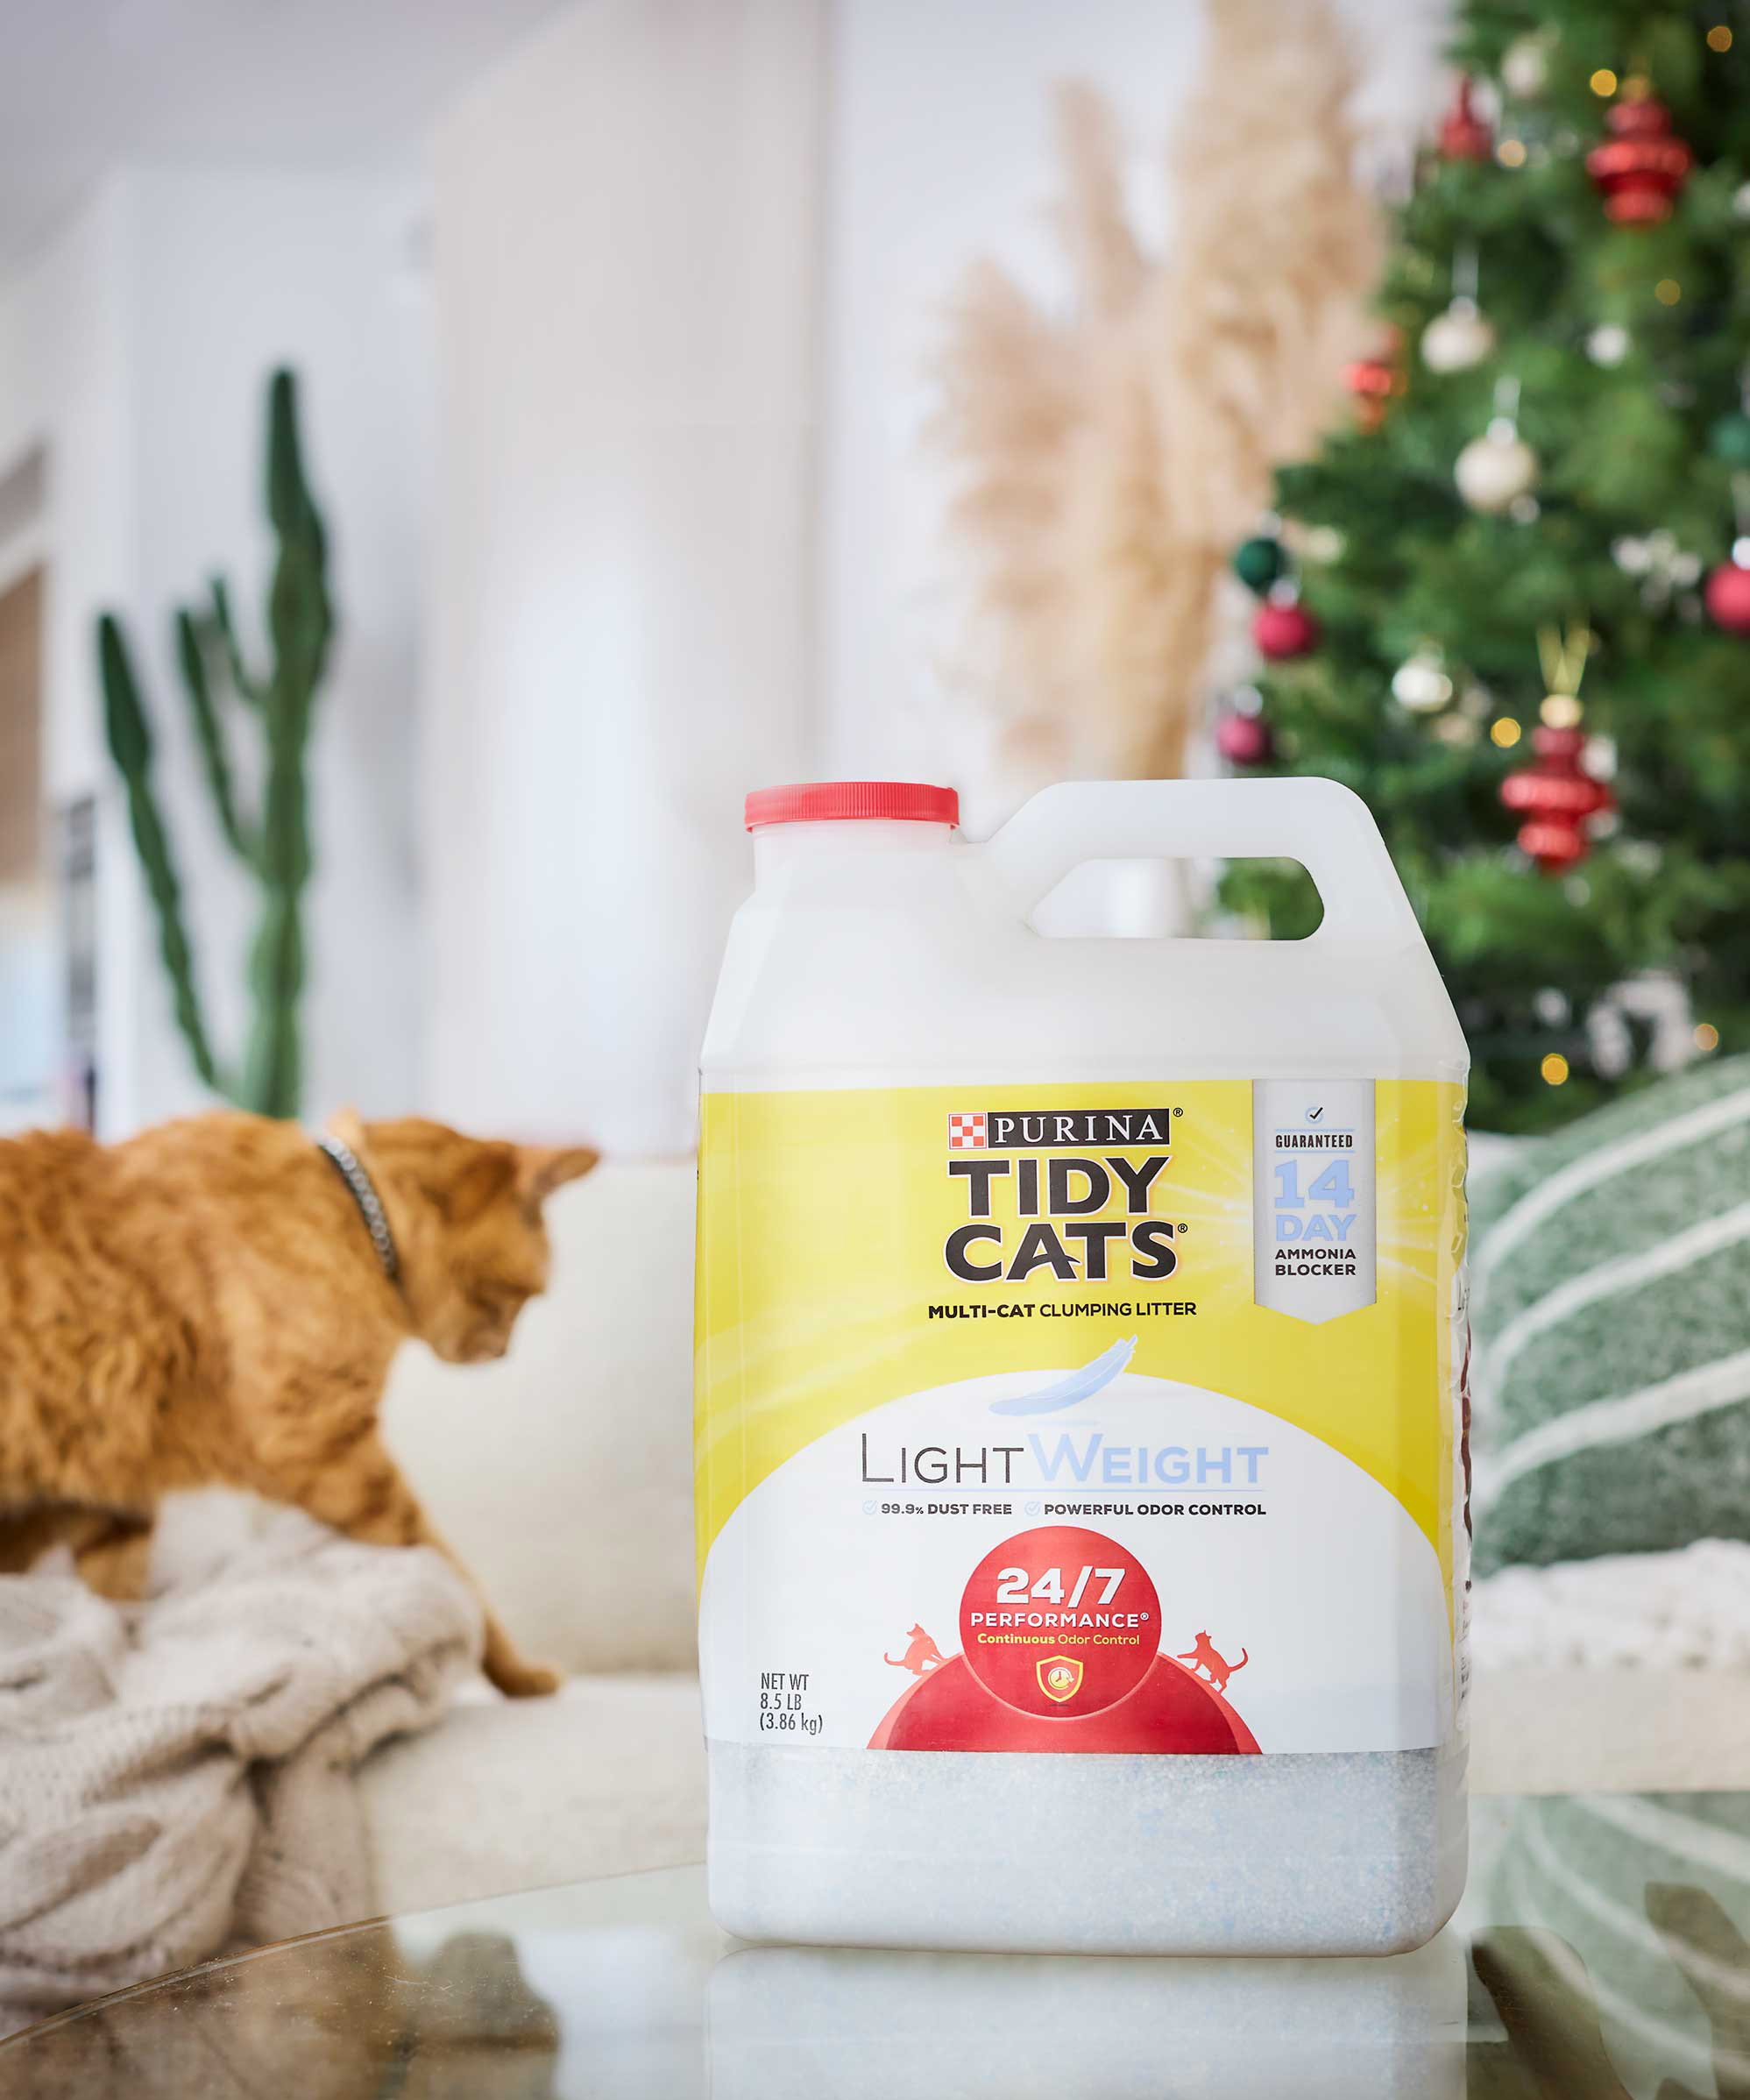 When it comes to the litter box, keep odors at bay and clean-up easy with Tidy Cats Lightweight Litter, which is 99.9% dust-free and features continuous odor control plus a clean linen scent.